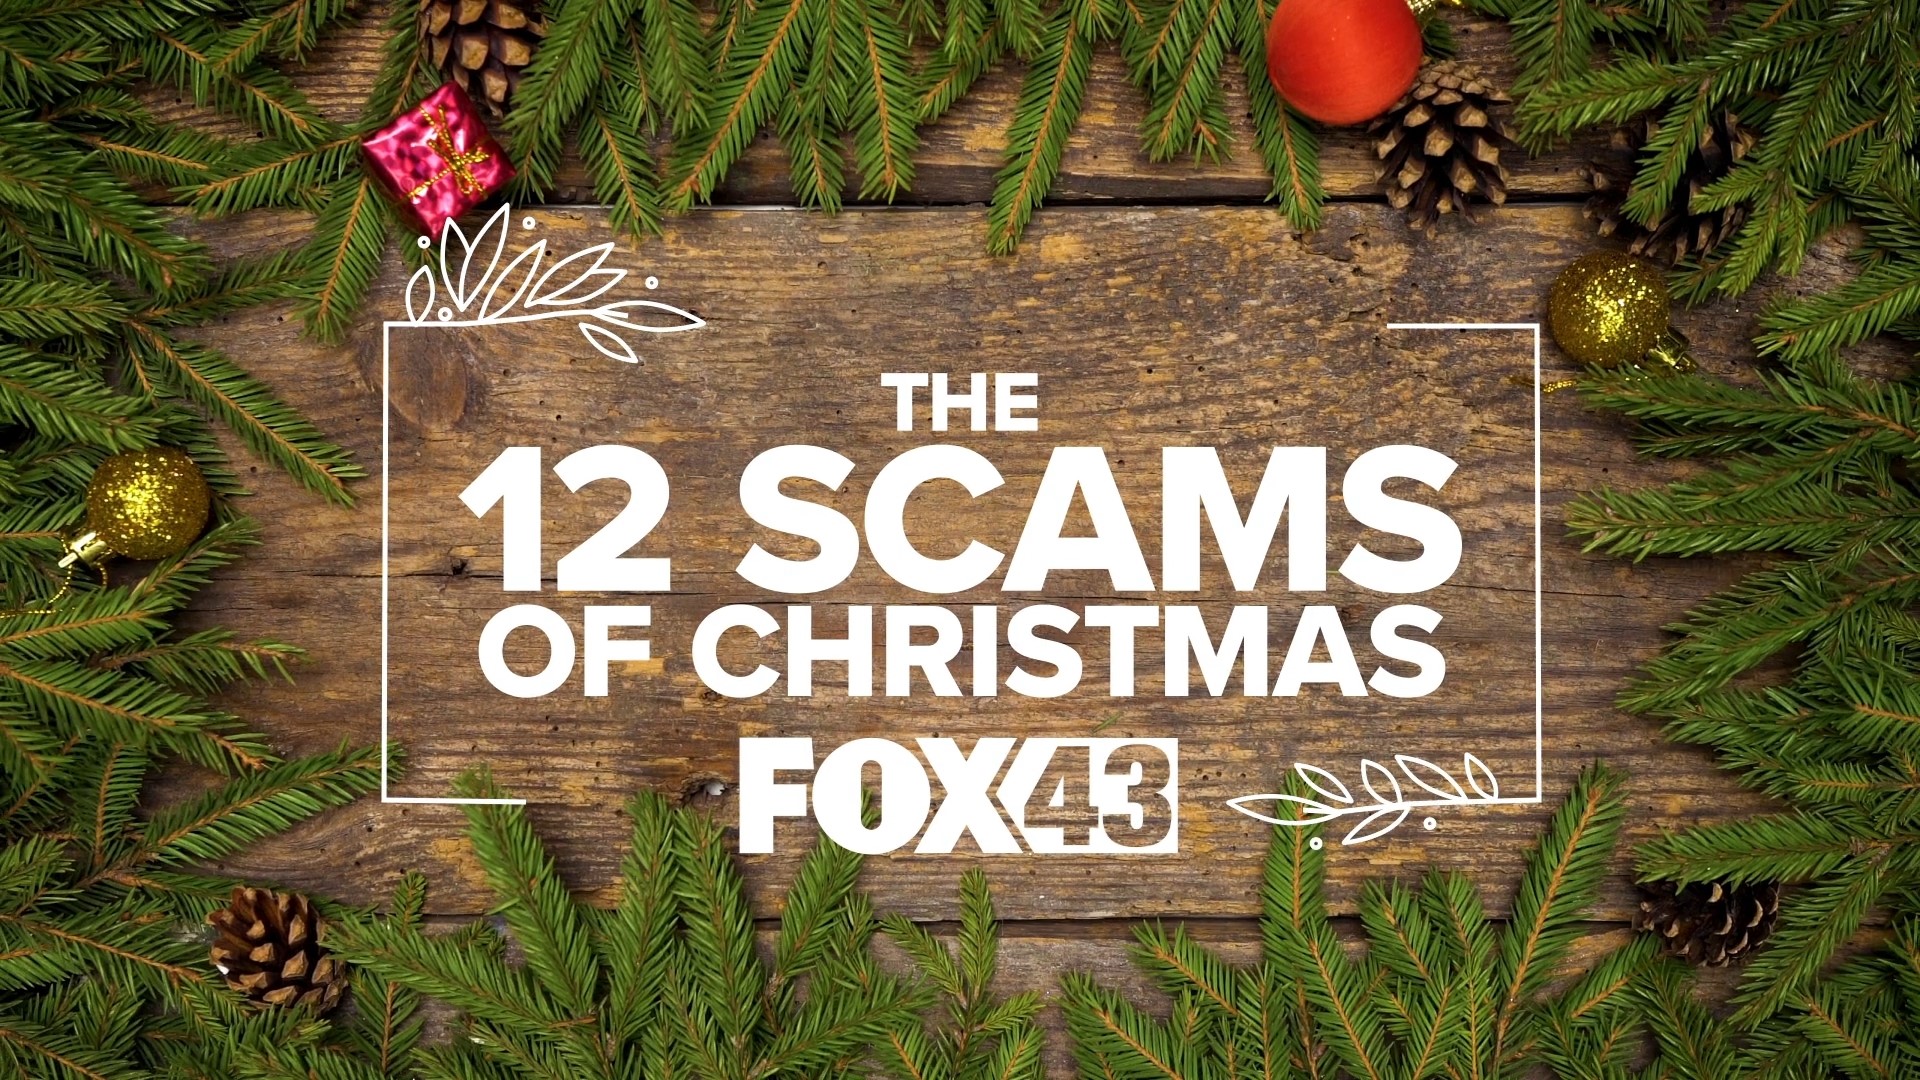 Look-alike websites made FOX43 Finds Out's 12 scams of Christmas.